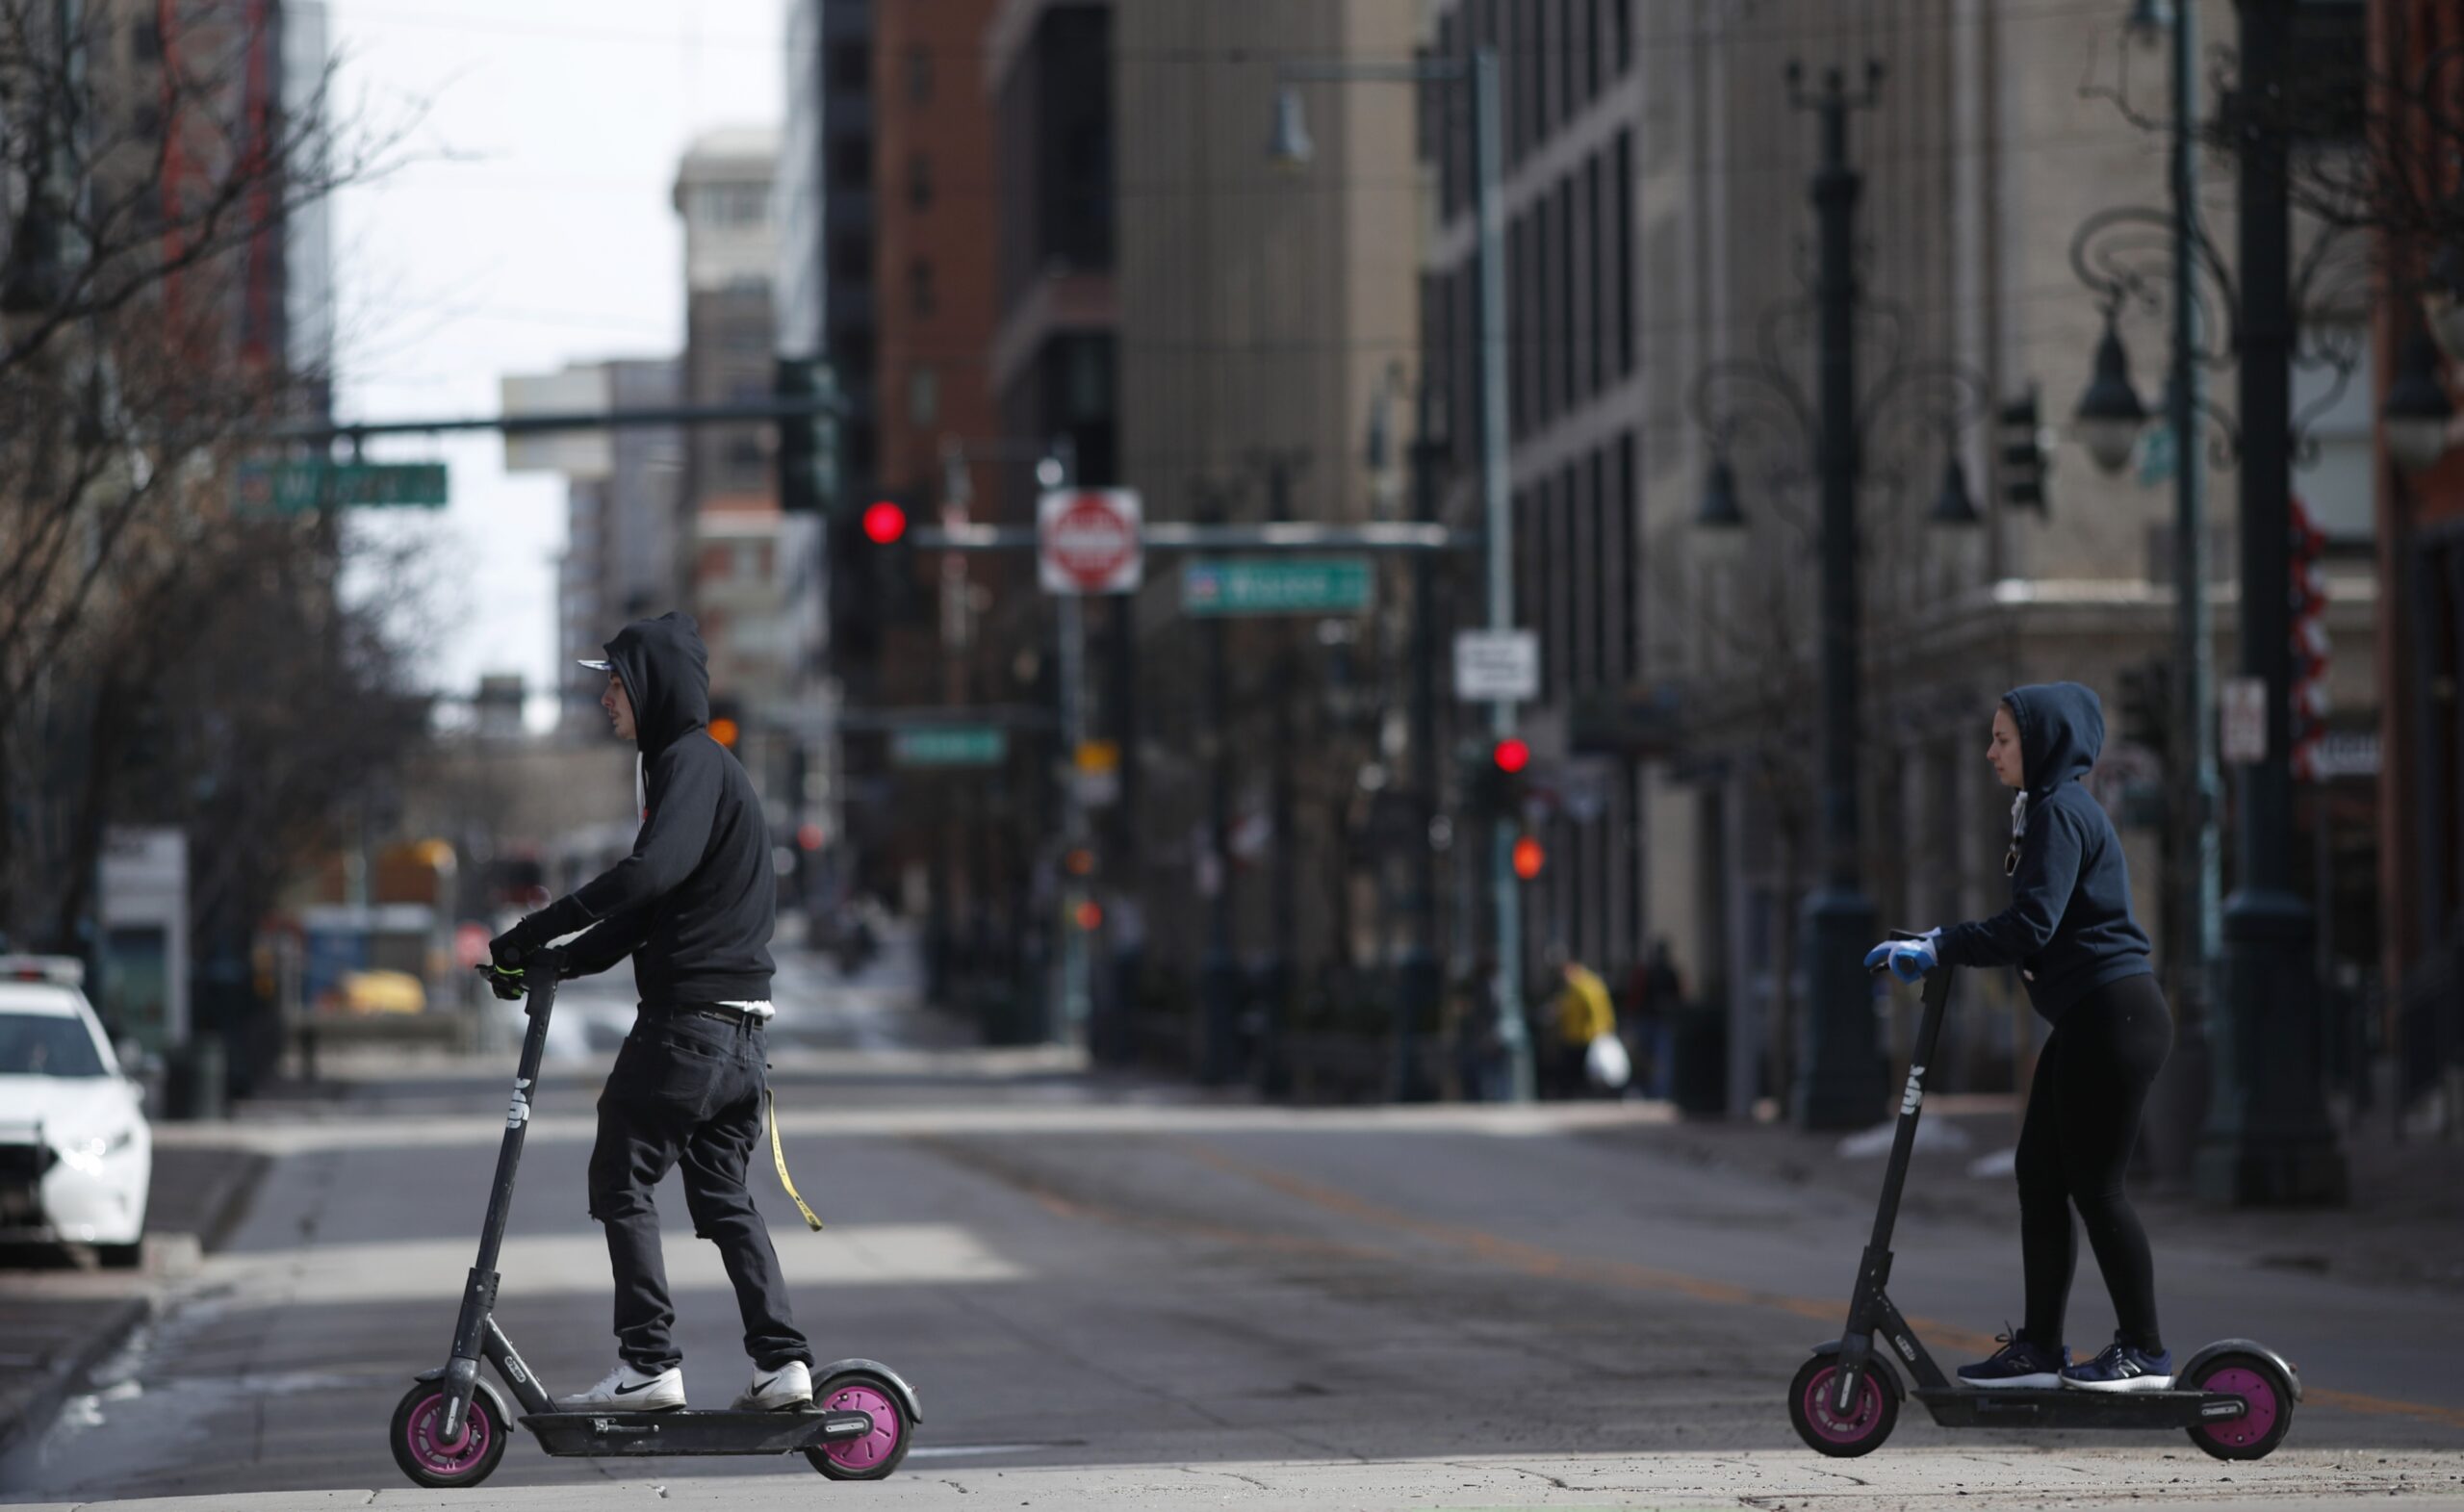 Riders cross a deserted road on electric scooters